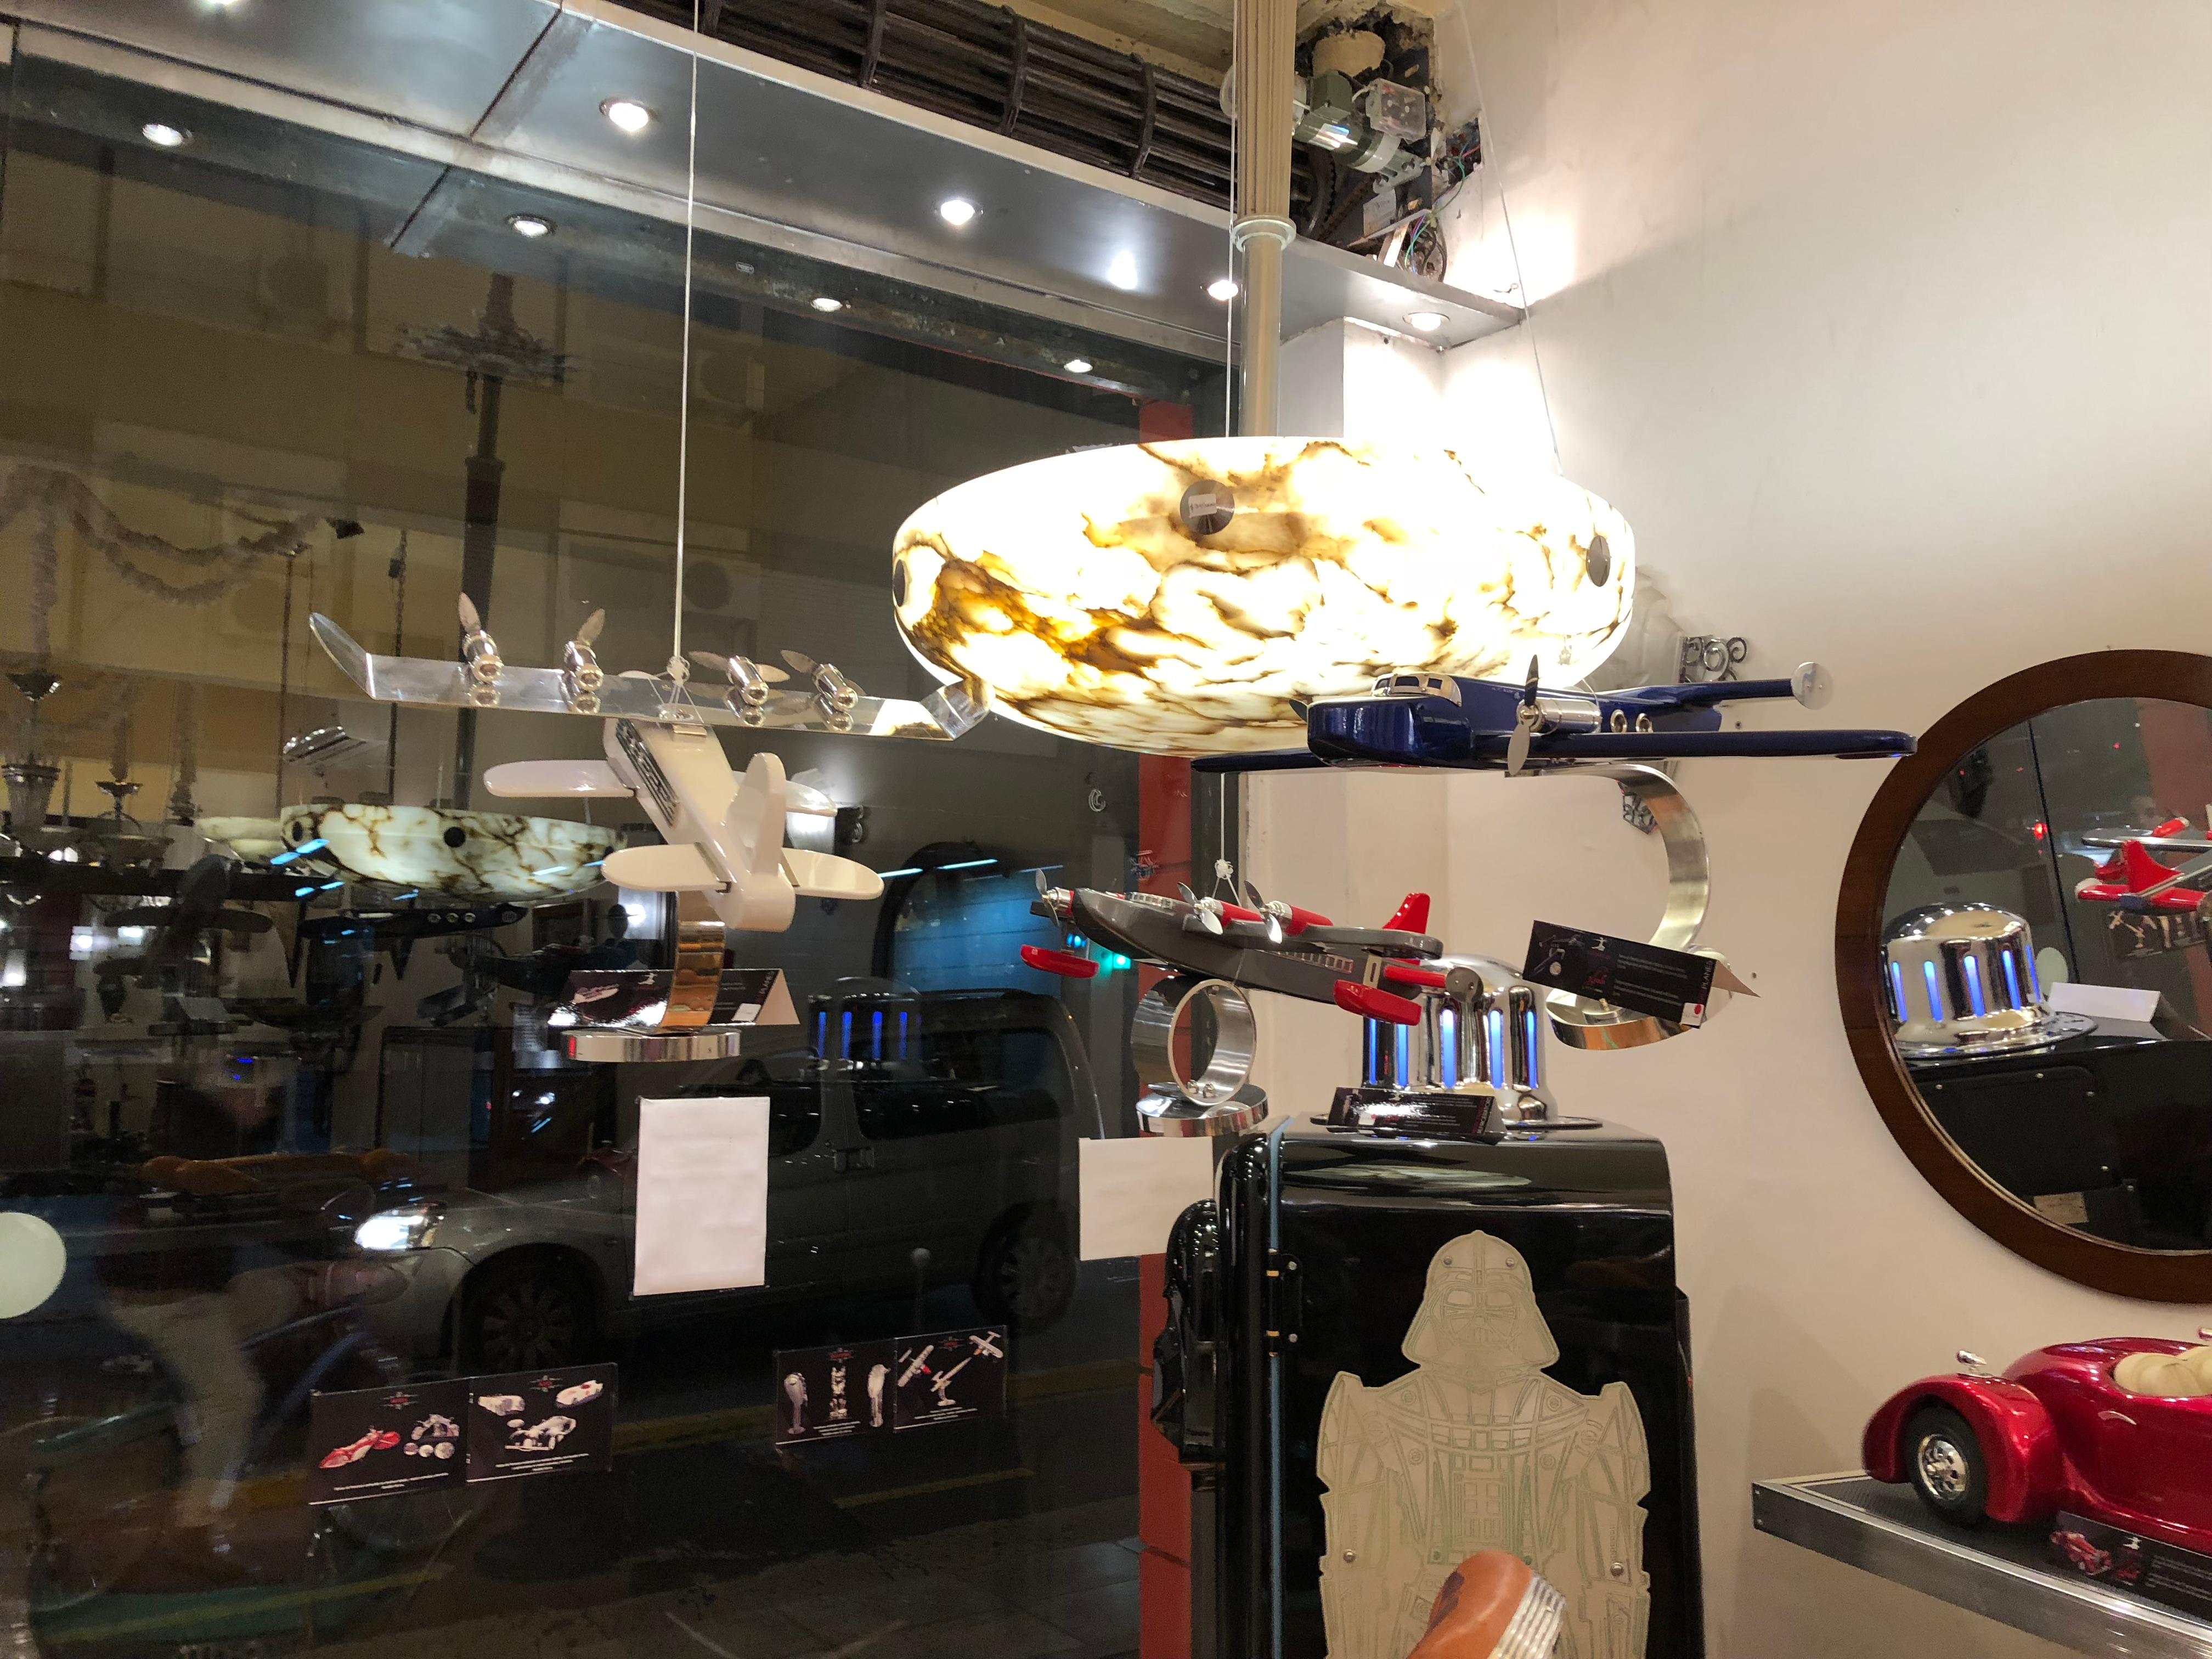 Incredible airplane: in solid wood.
We have specialized in the sale of Art Deco and Art Nouveau and Vintage styles since 1982. If you have any questions we are at your disposal.
Pushing the button that reads 'View All From Seller'. And you can see